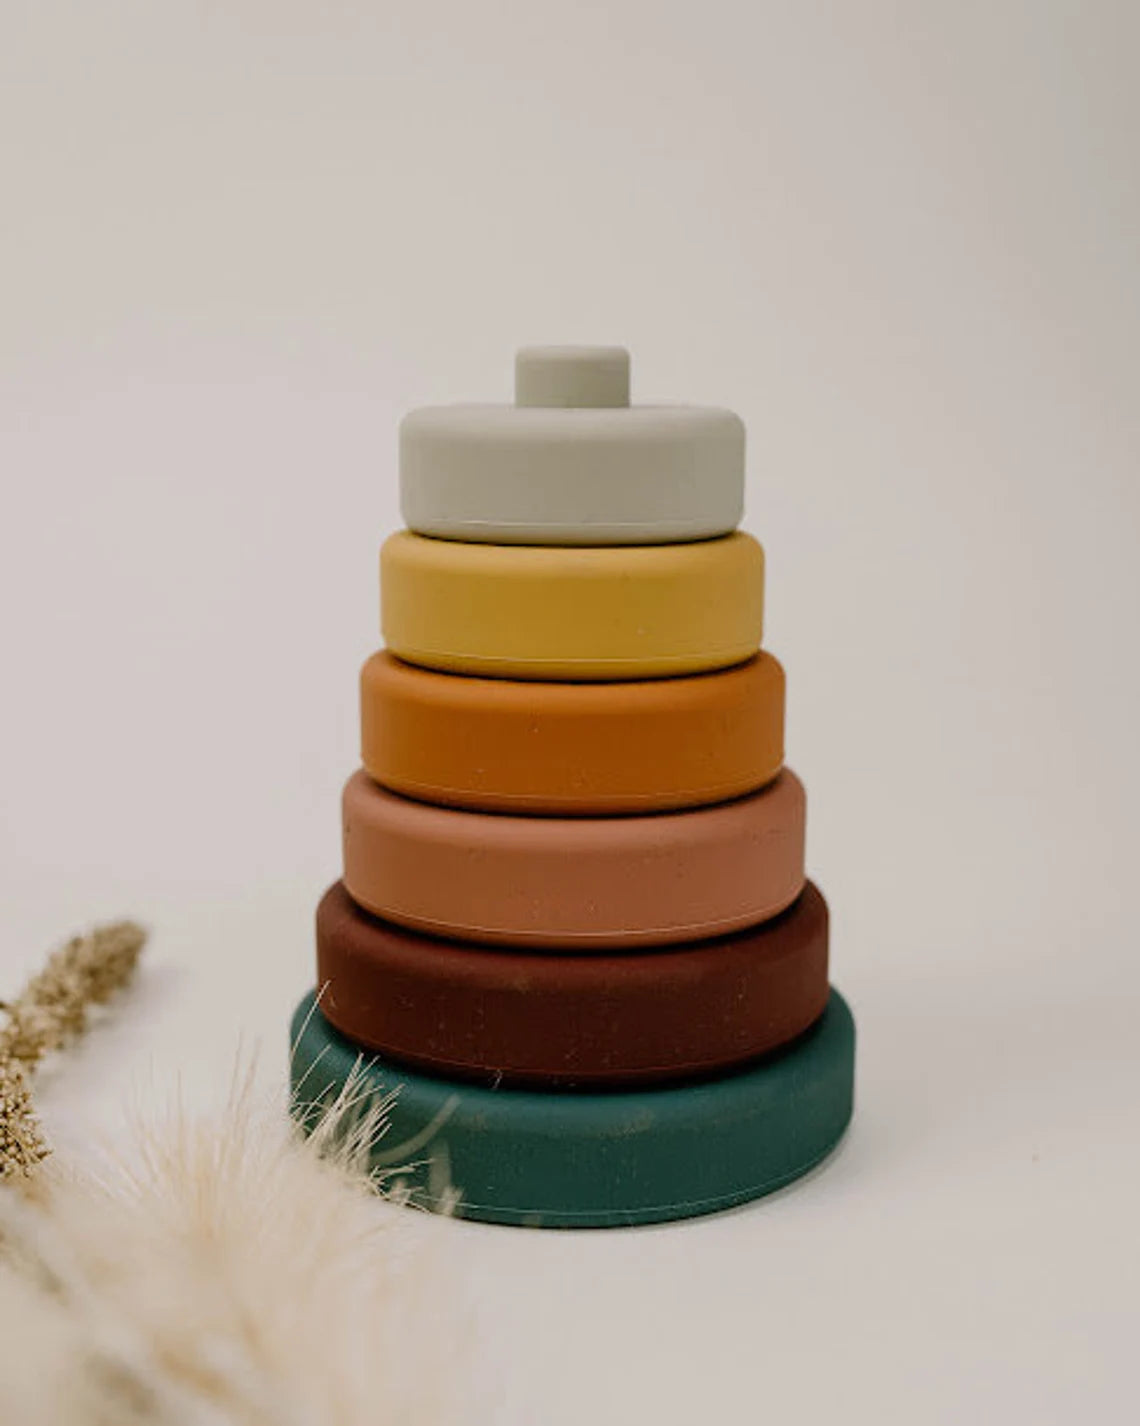 wooden stacking toys